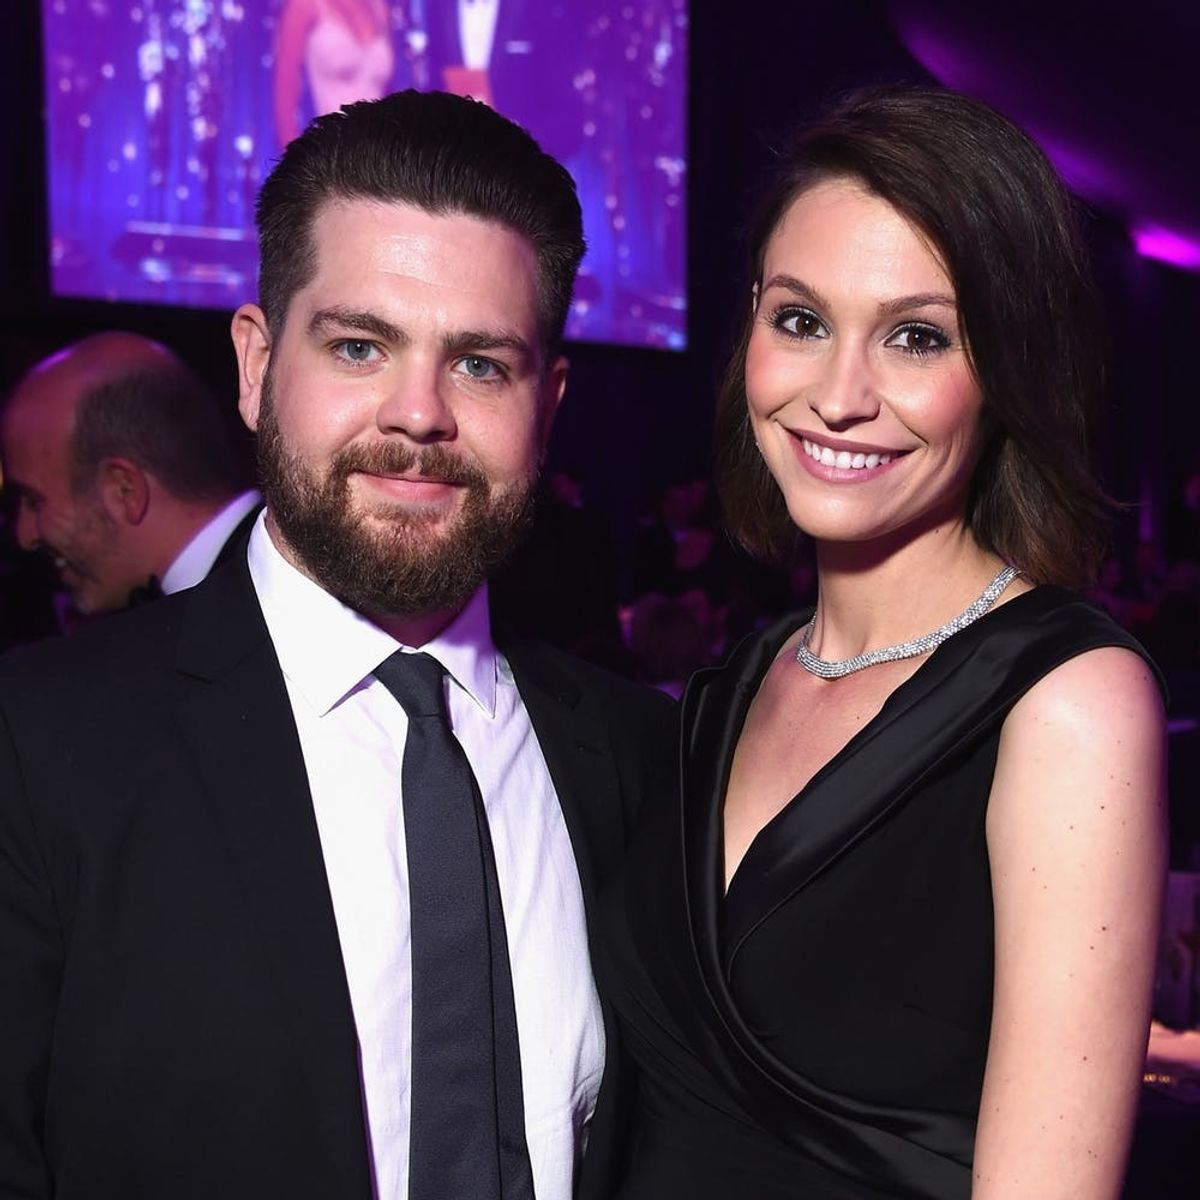 Jack Osbourne’s New Baby Girl Shares a Name With One of Our Favorite Disney Characters